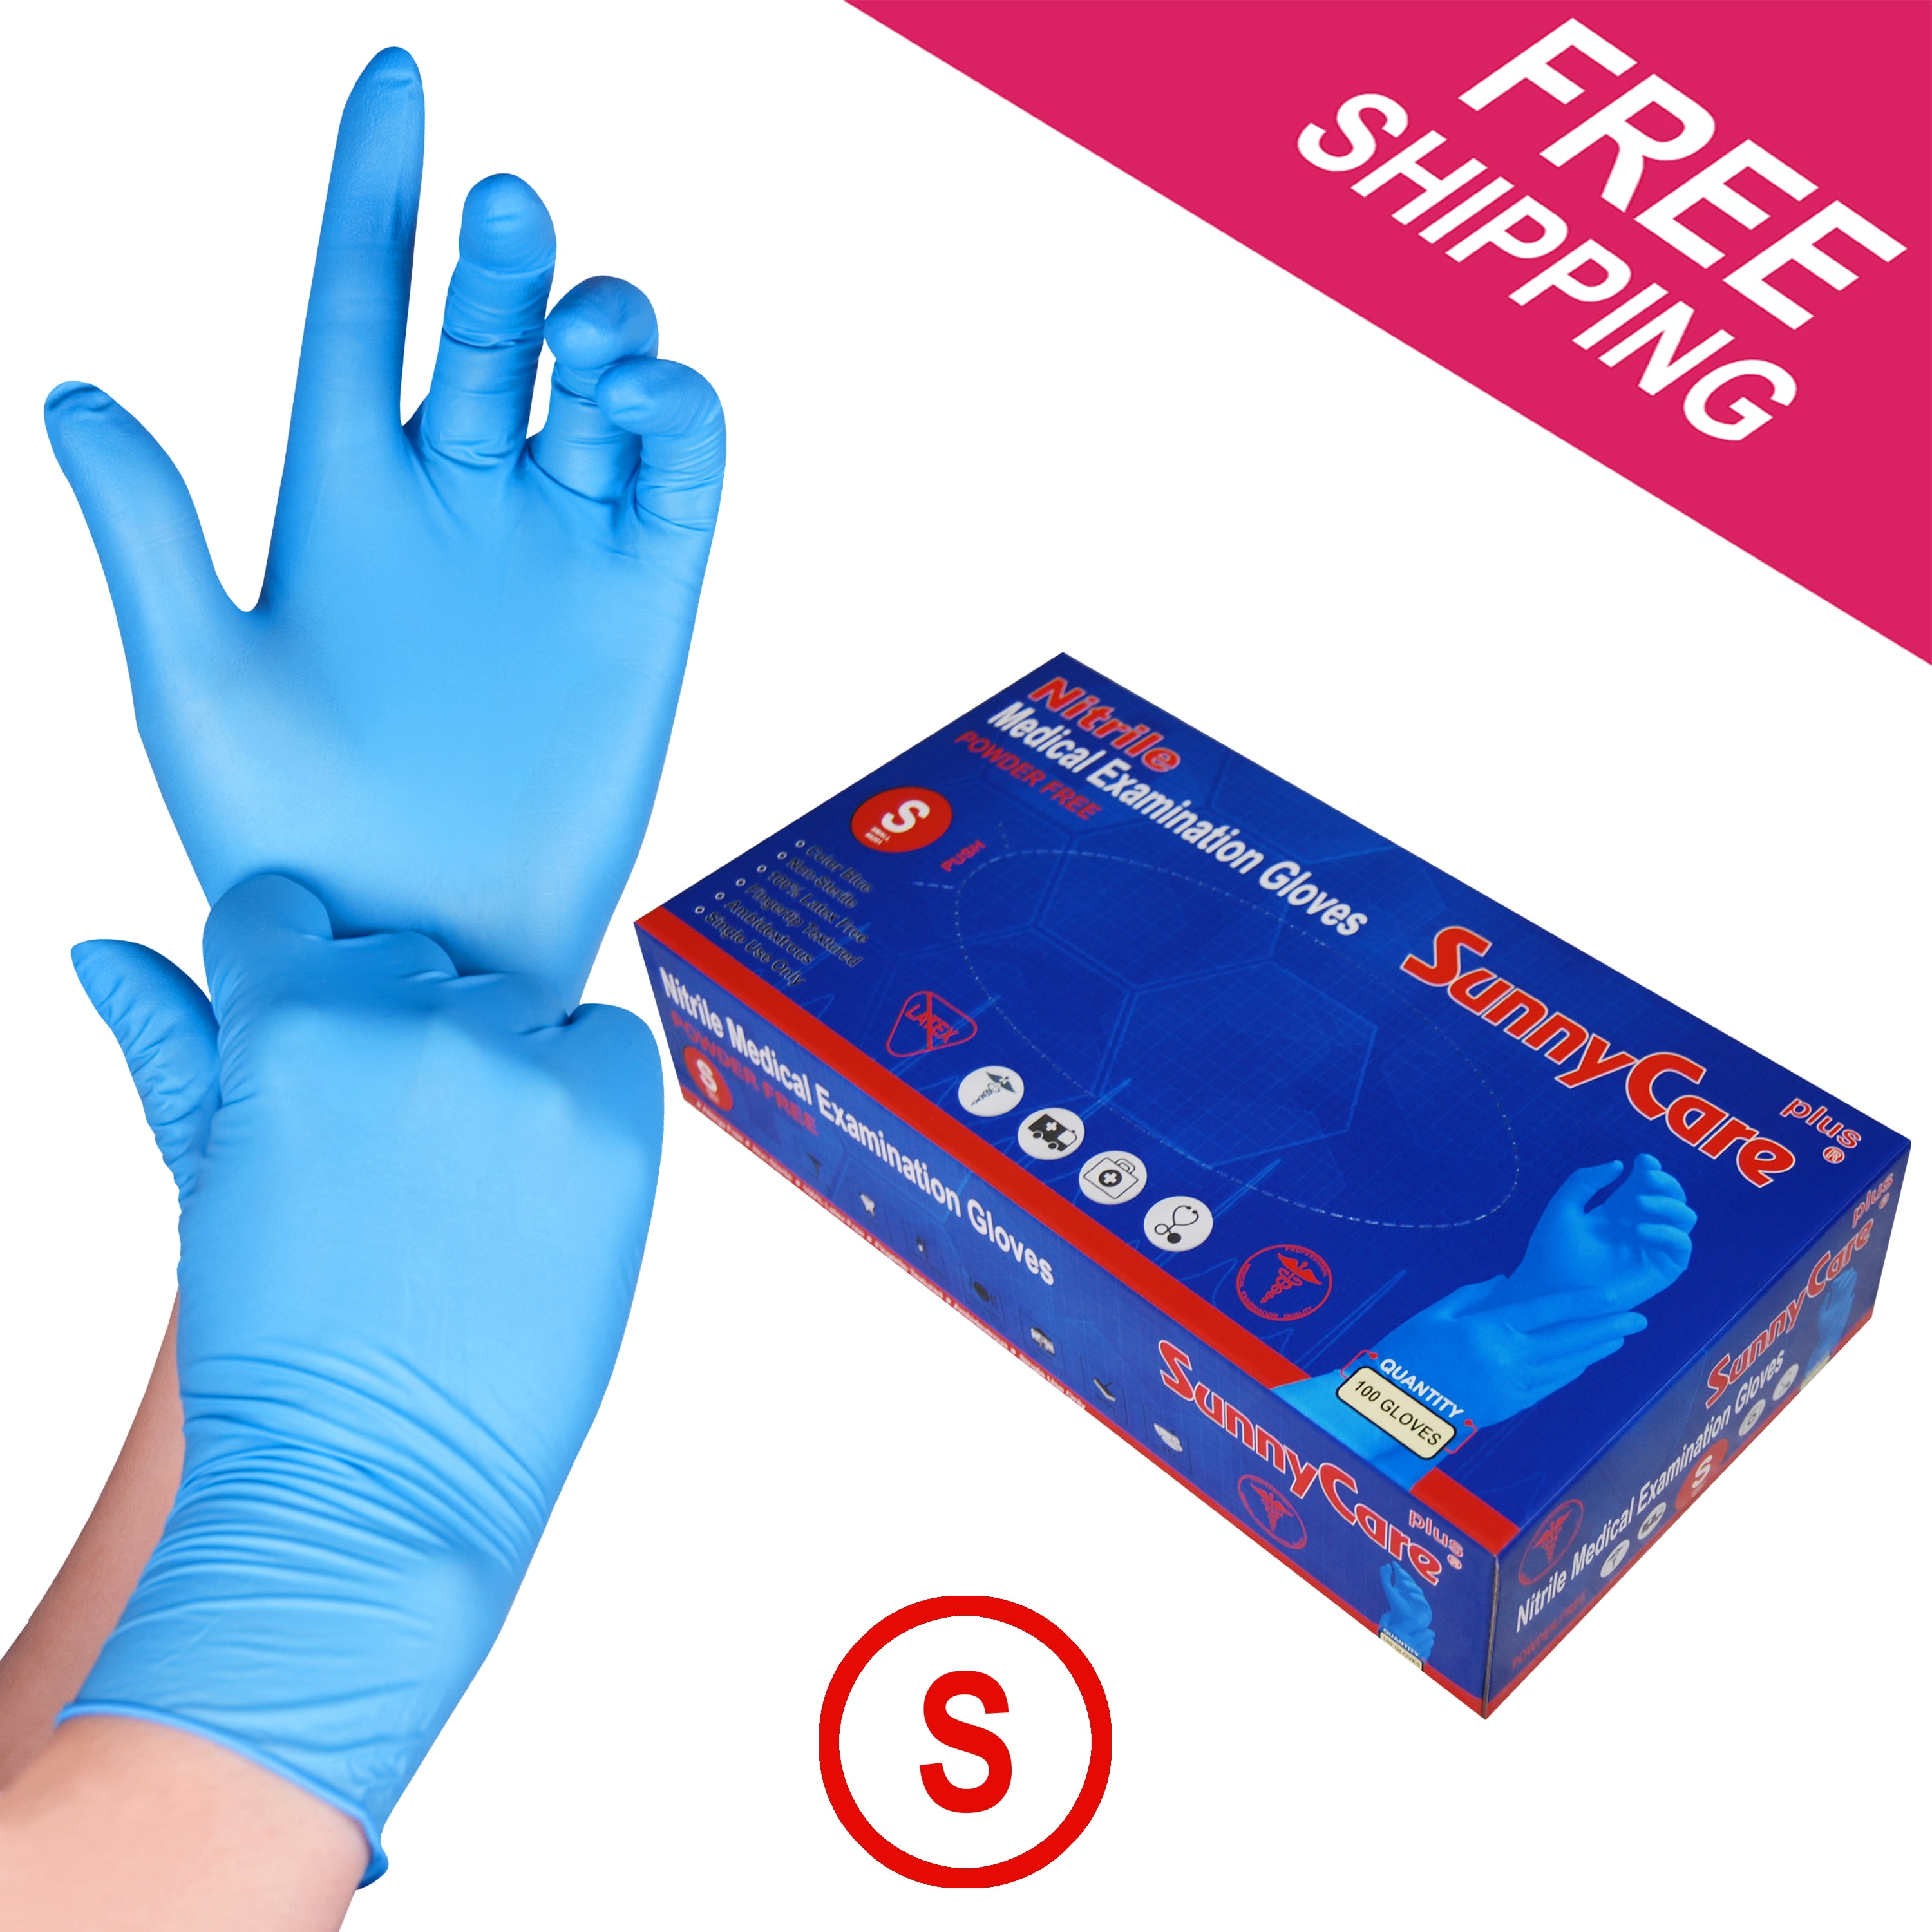 Womens Doctor Gloves Nitrile Powder Free Latex Free Cleaning USA SIZE LARGE 